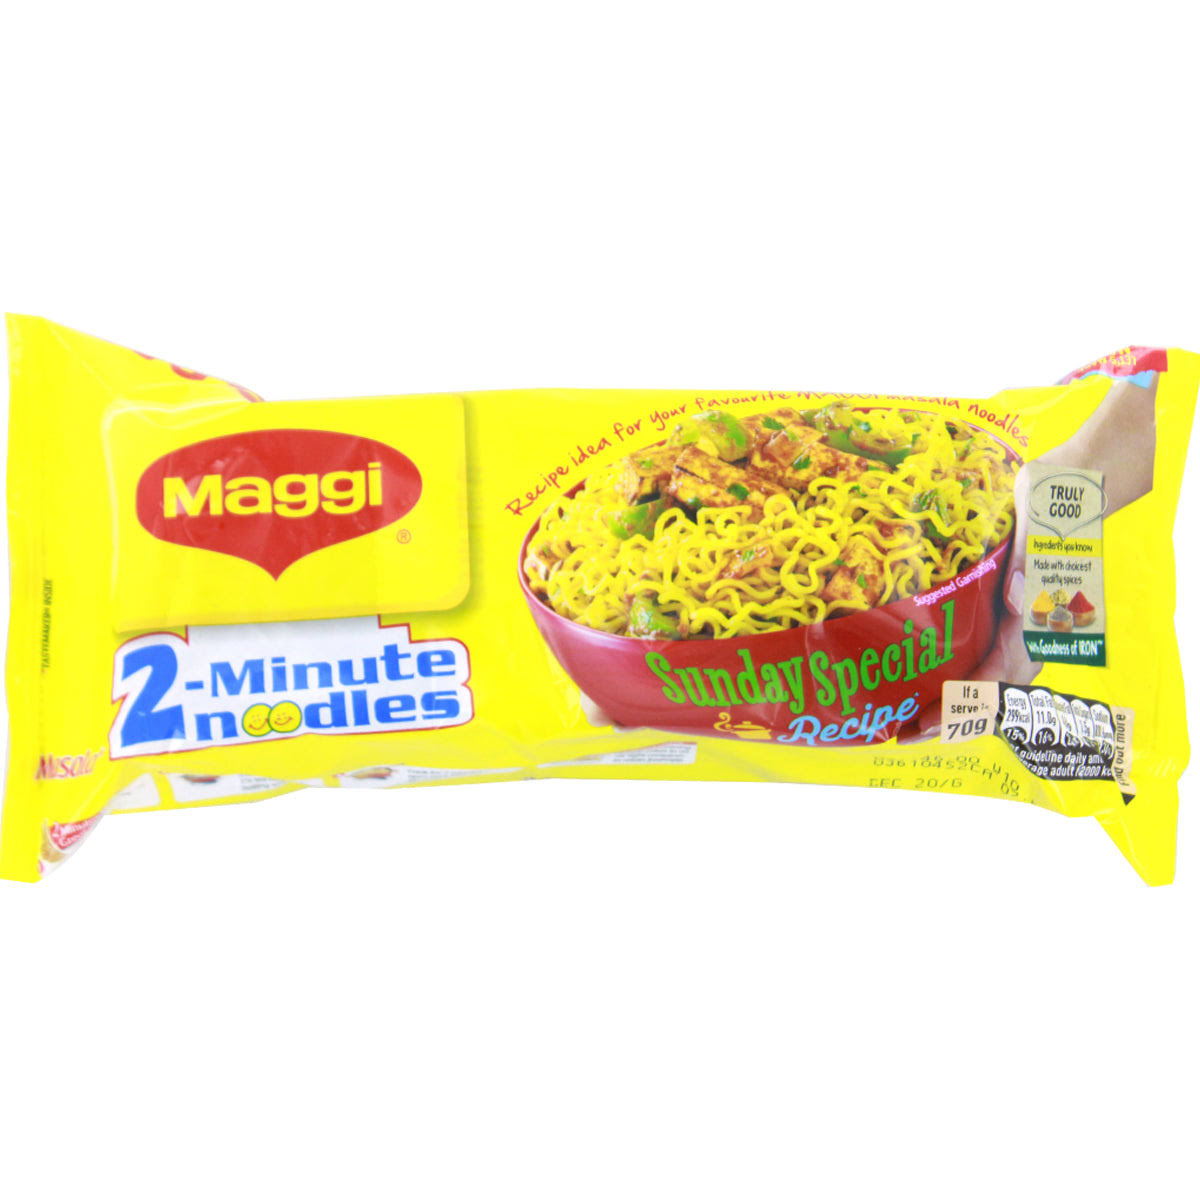 Maggi Masala Spicy Instant Noodles